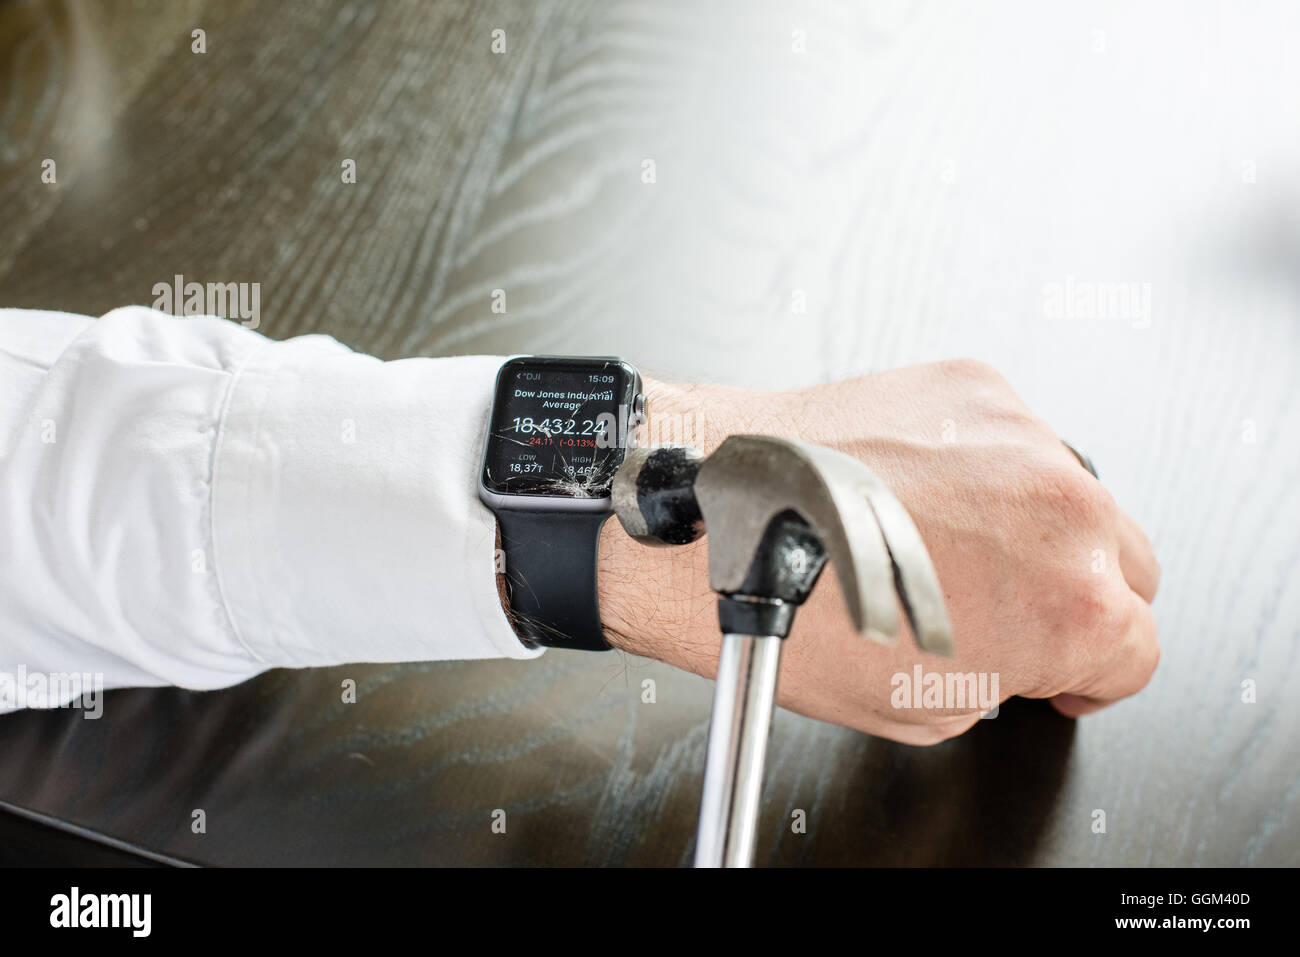 Ostfildern, Germany - July 31, 2016: A businessman wearing a white shirt is destroying the Apple Watch on his wrist using a hamm Stock Photo